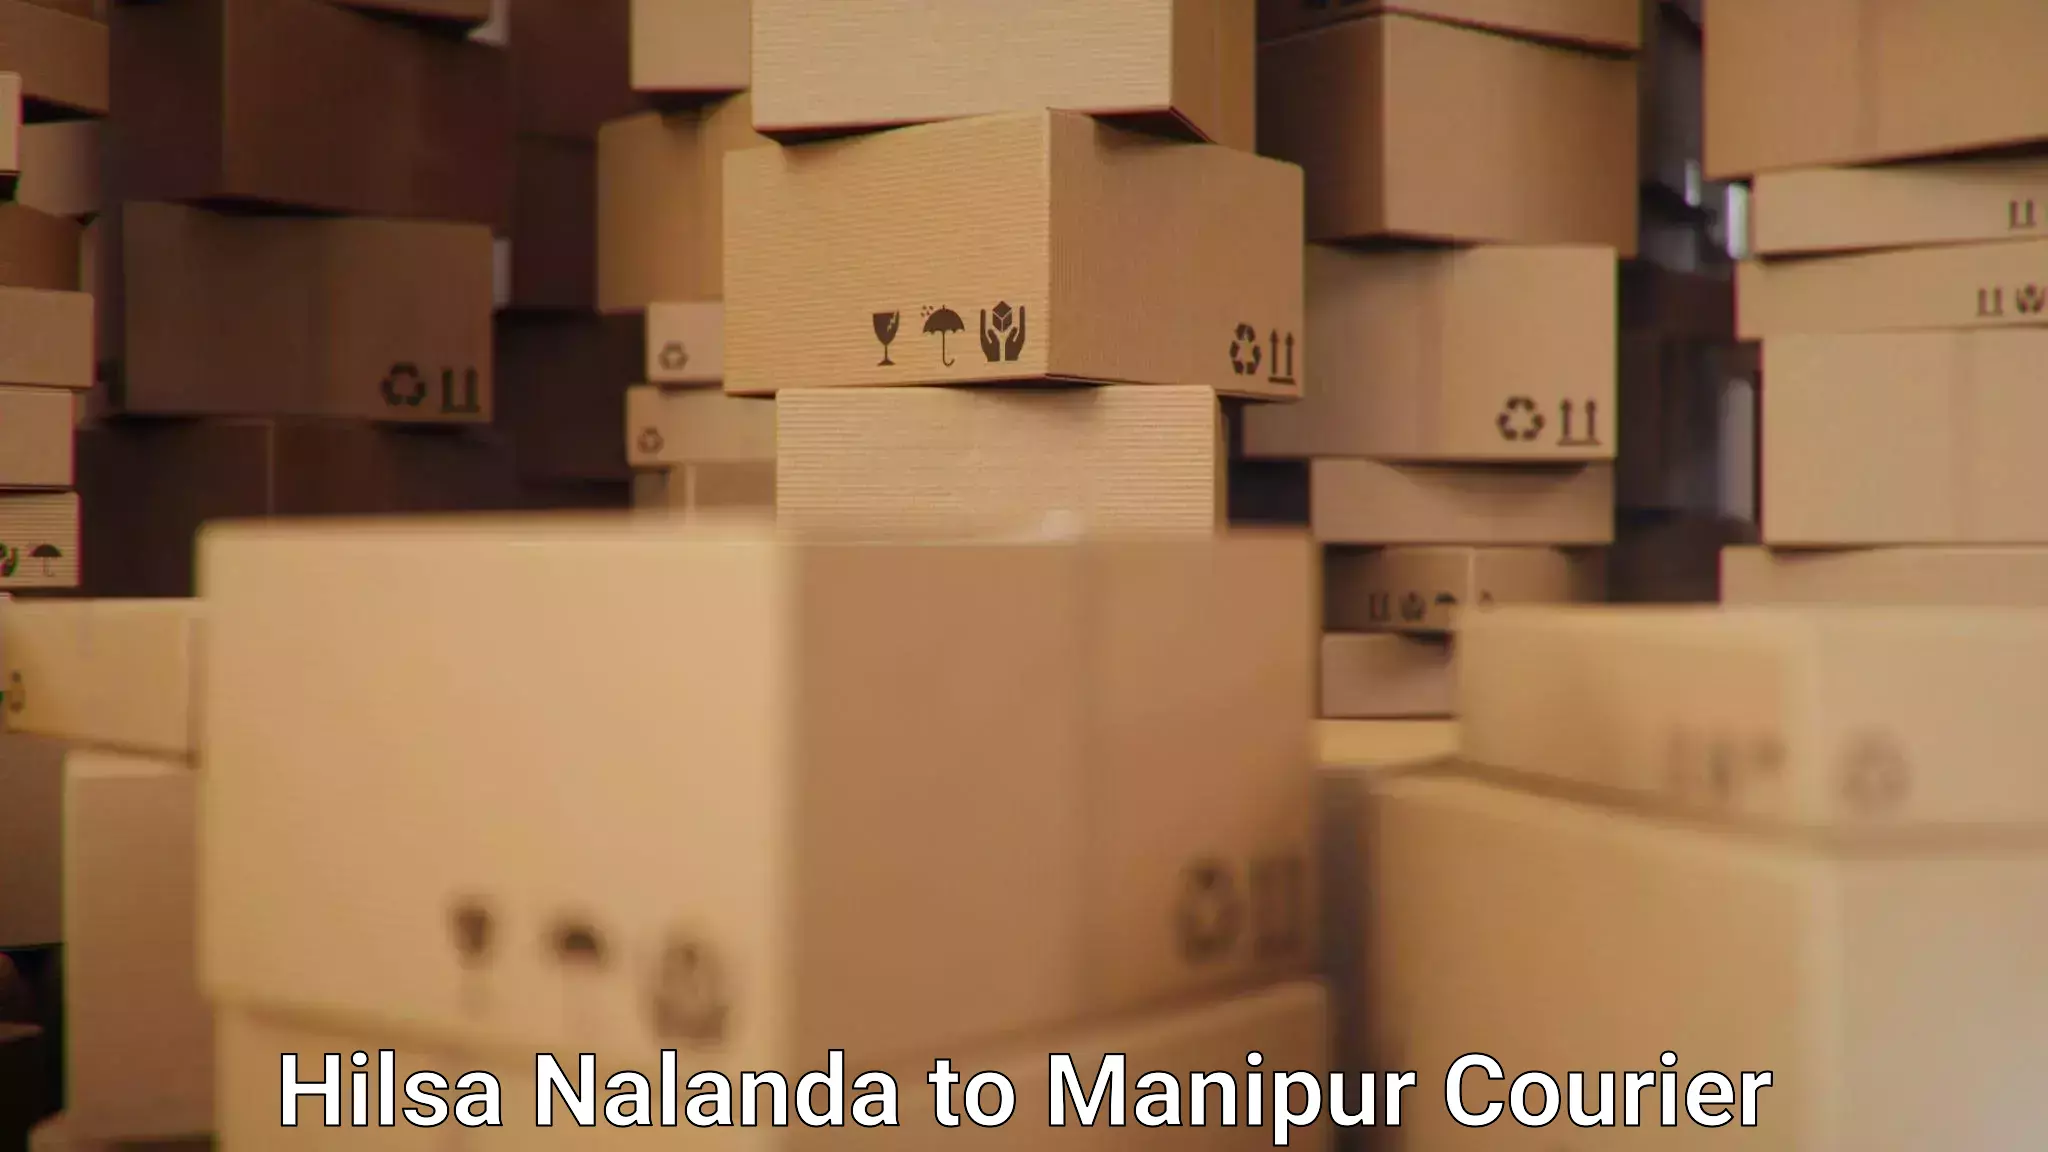 Business delivery service Hilsa Nalanda to Manipur